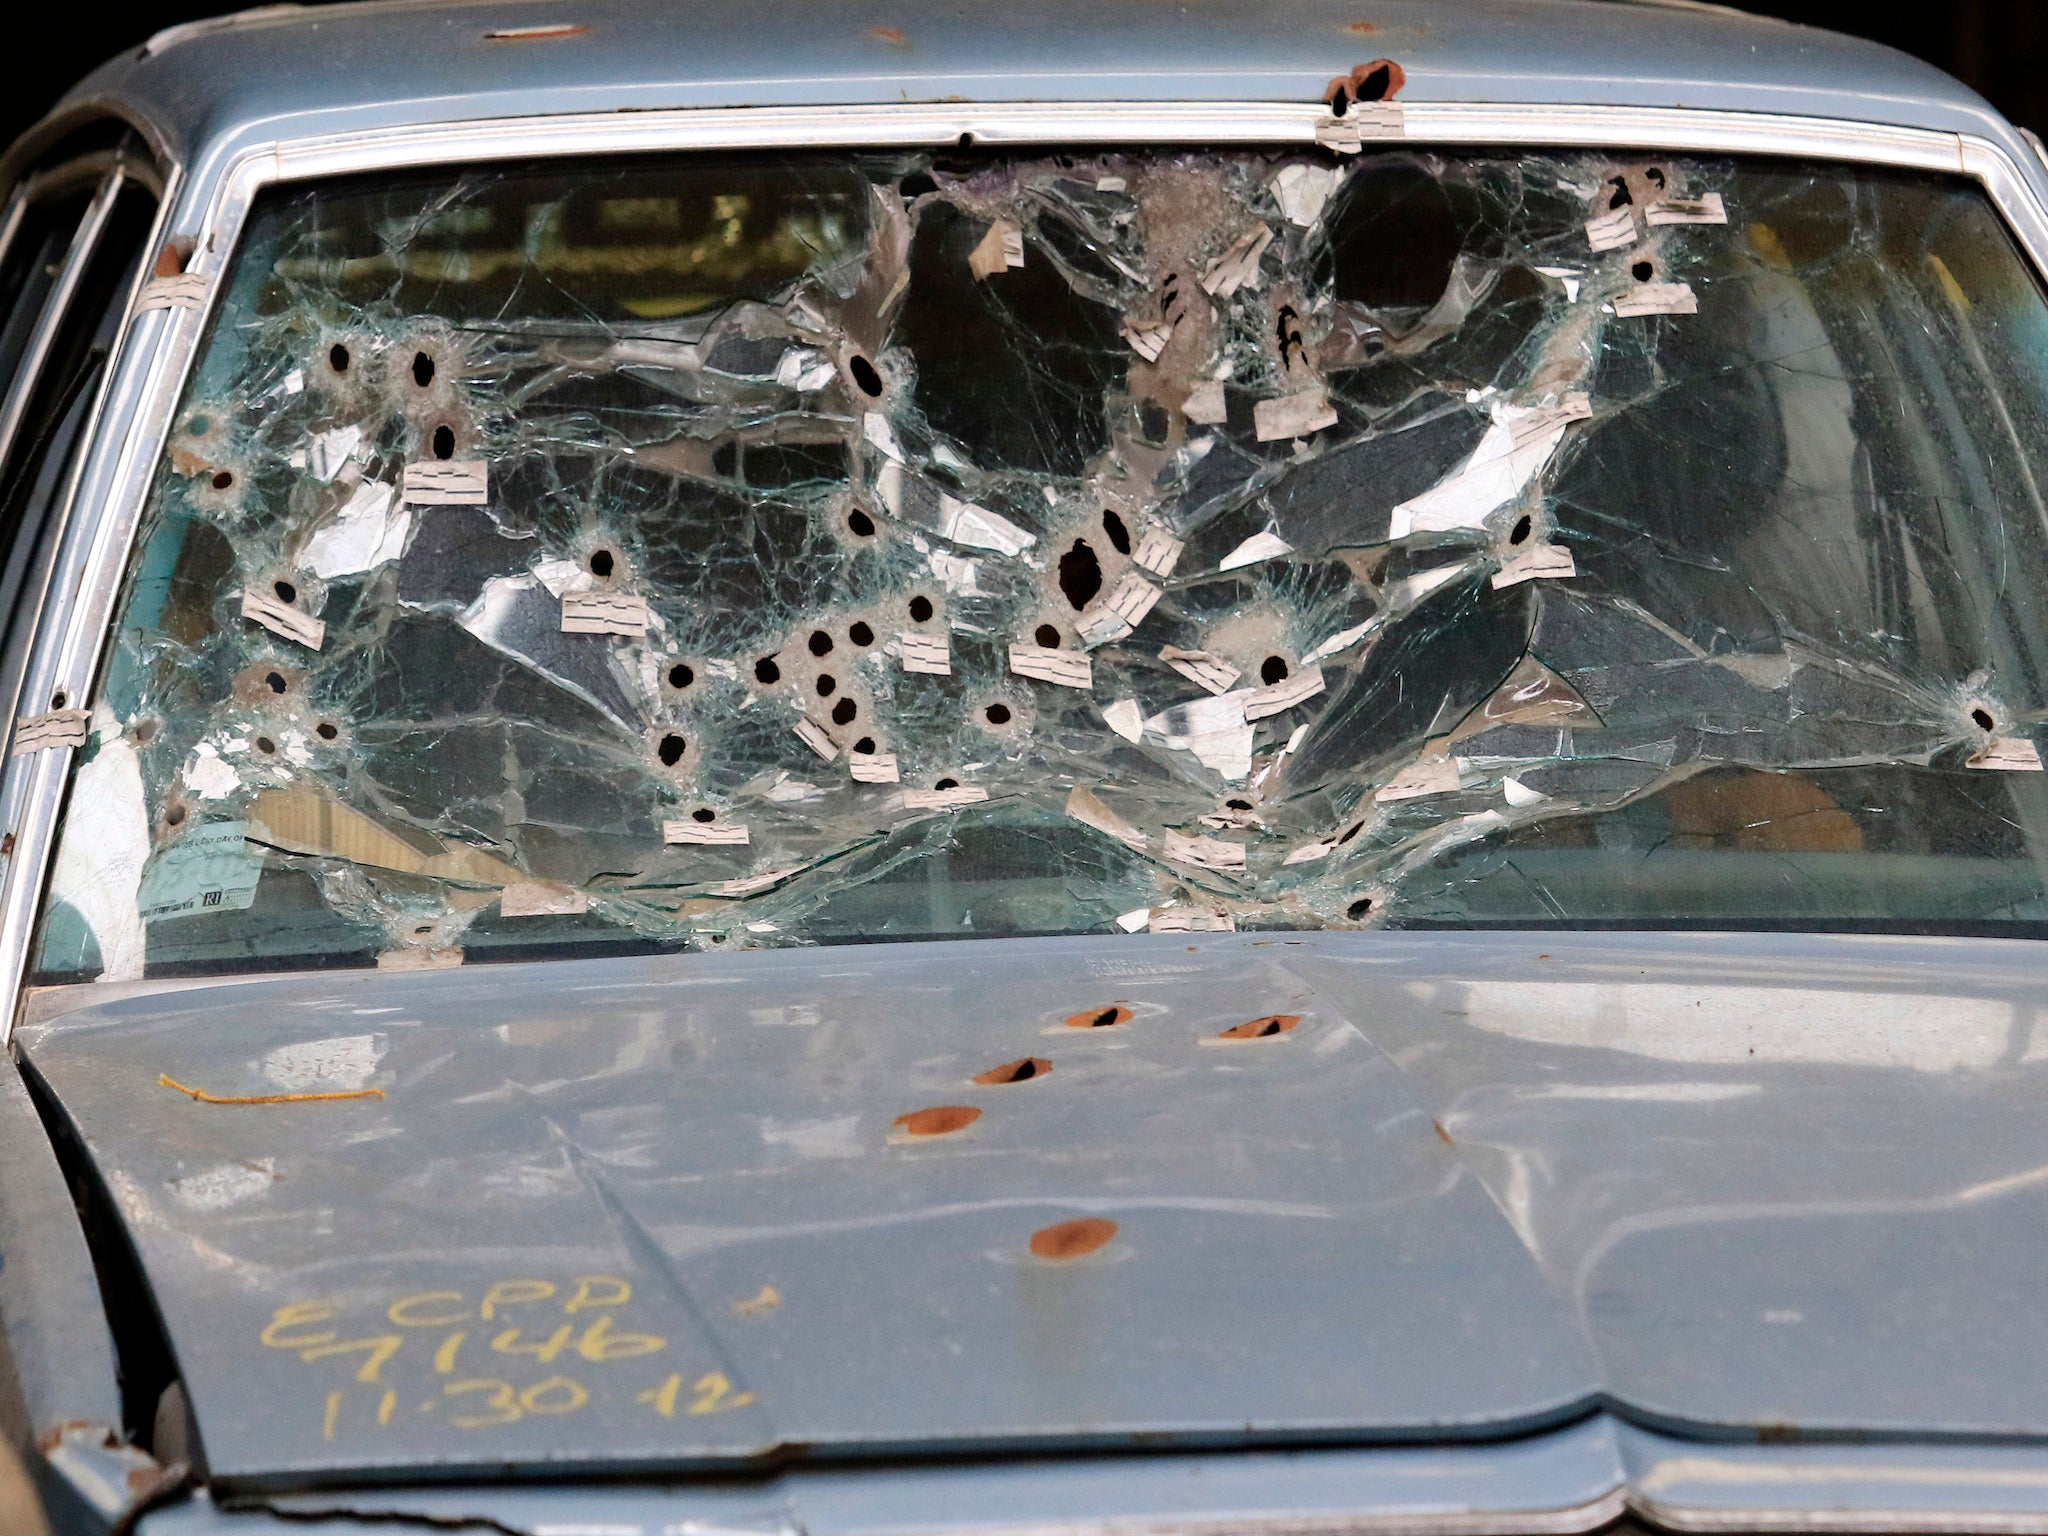 Mr Brelo fired repeatedly through the windshield of Timothy Russell's car